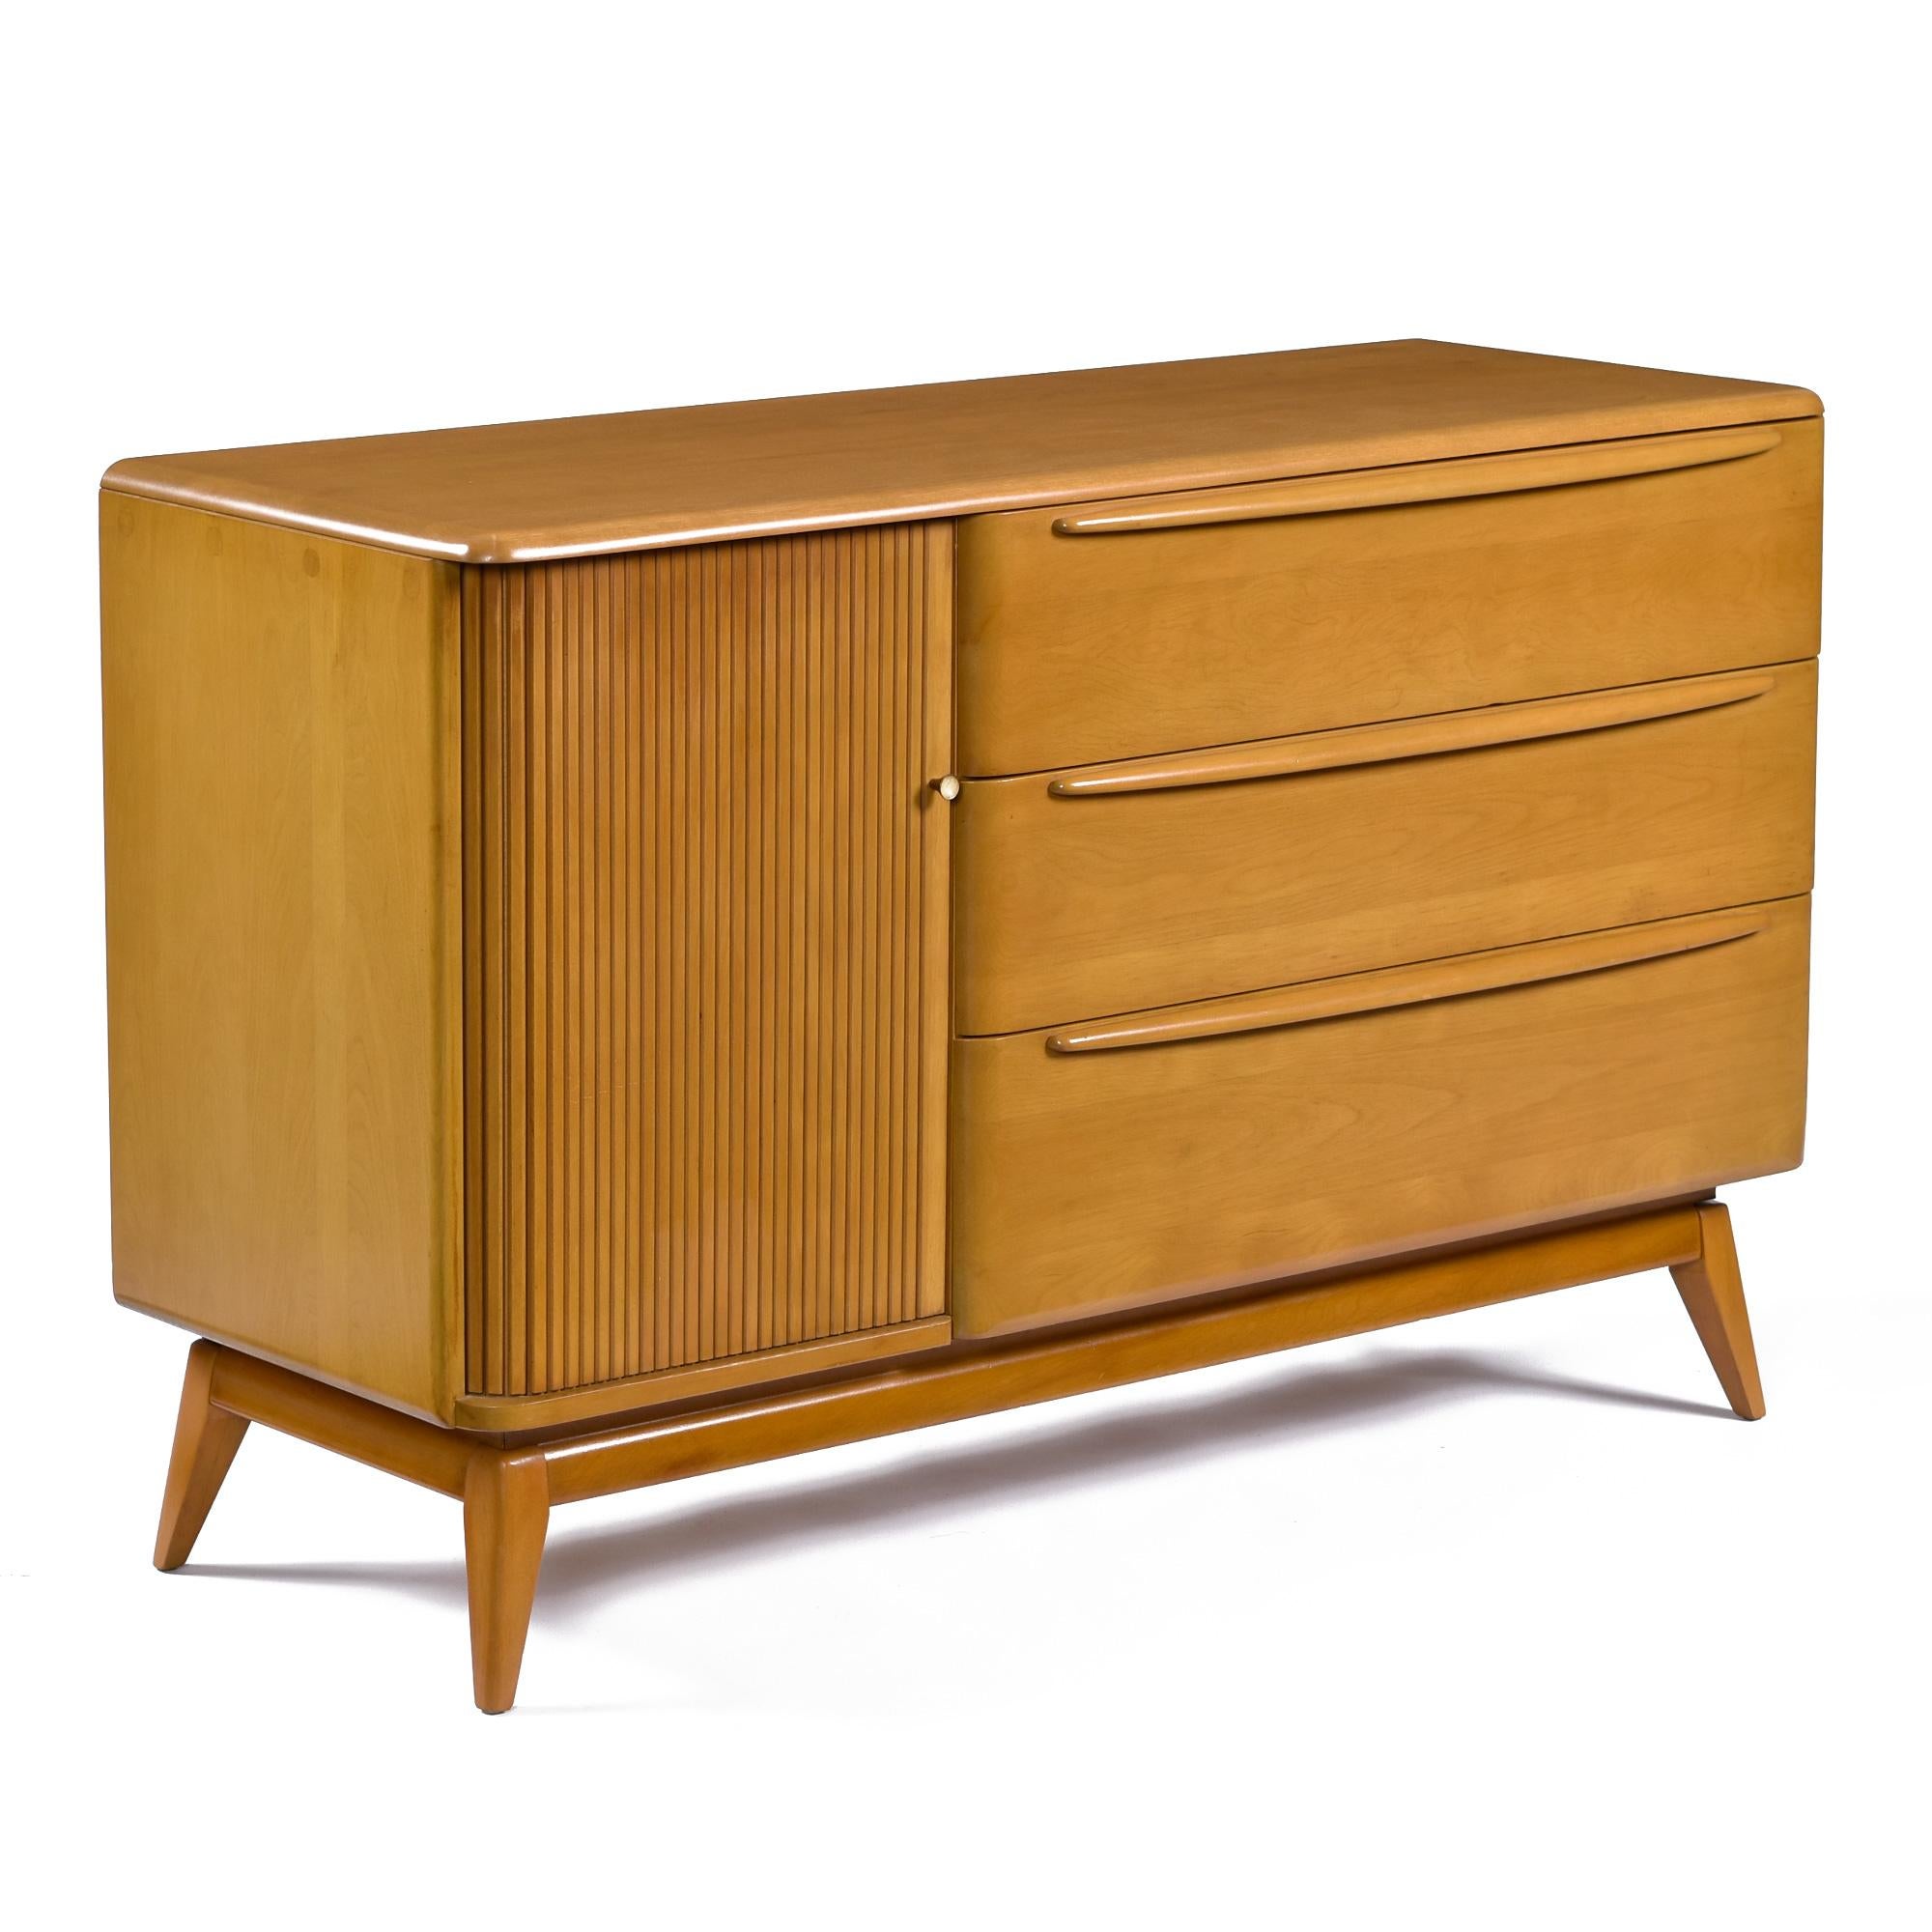 American Vintage Restored Solid Maple Heywood Wakefield M-1542 Wheat Tambour Credenza For Sale